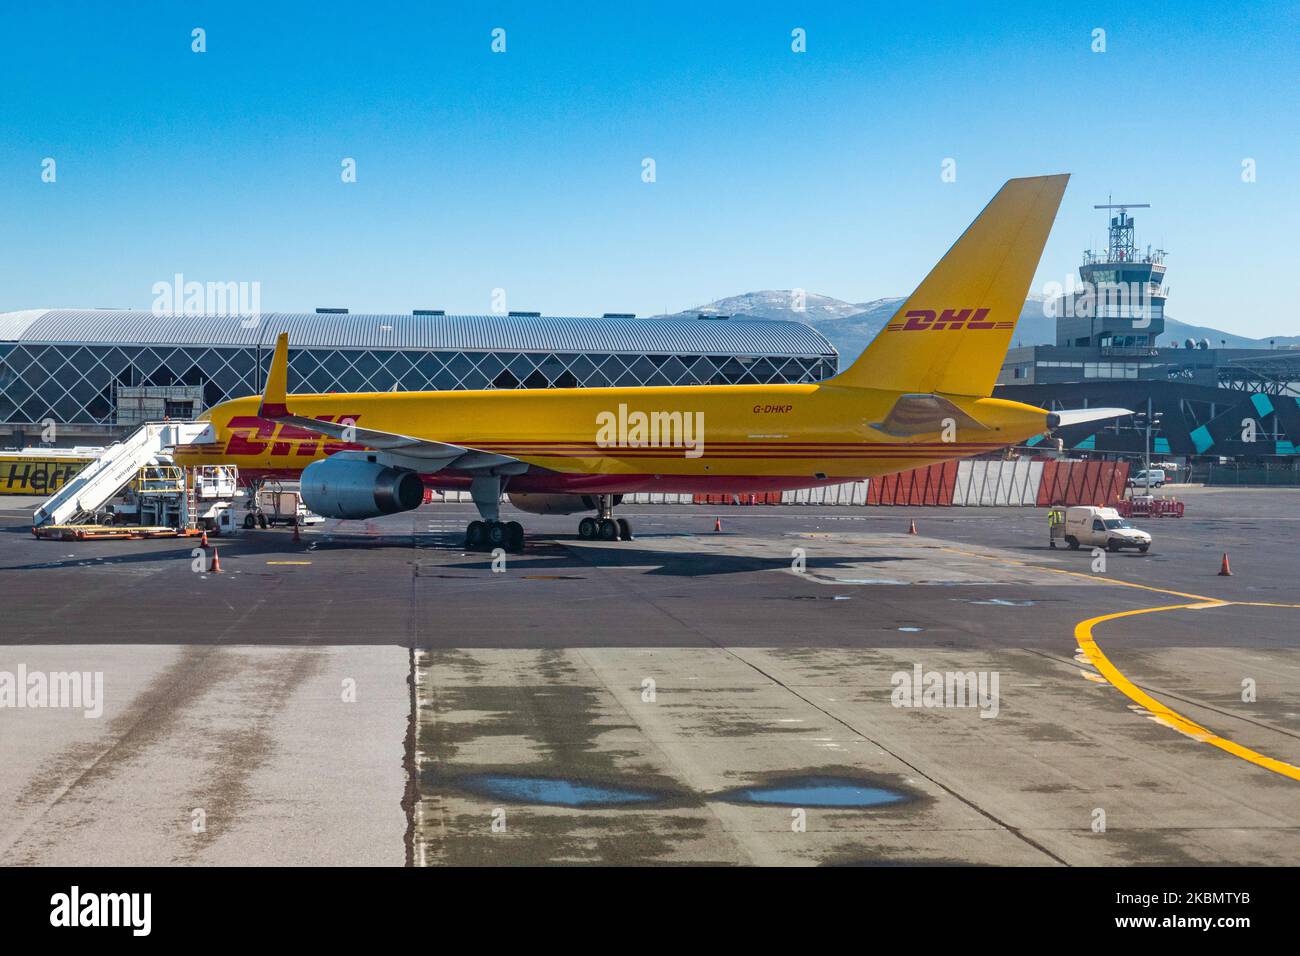 DHL Air Boeing 757 Cargo airplane as seen during the day with the cargo door open at Thessaloniki International Airport Makedonia SKG LGTS in Greece. The Boeing B757 or 757-200F freight aircraft has the registration G-DHKP and is powered by 2x Roll Royce RR jet engines. DHL Aviation is a division of DHL Express owned by Deutsche Post and is an Express Logistics air freight carrier. During the Covid-19 Coronavirus pandemic, most of the passenger airlines grounded their fleet but the cargo airlines increased the flights to transport goods and supplies. March 16, 2020 (Photo by Nicolas Economou/N Stock Photo